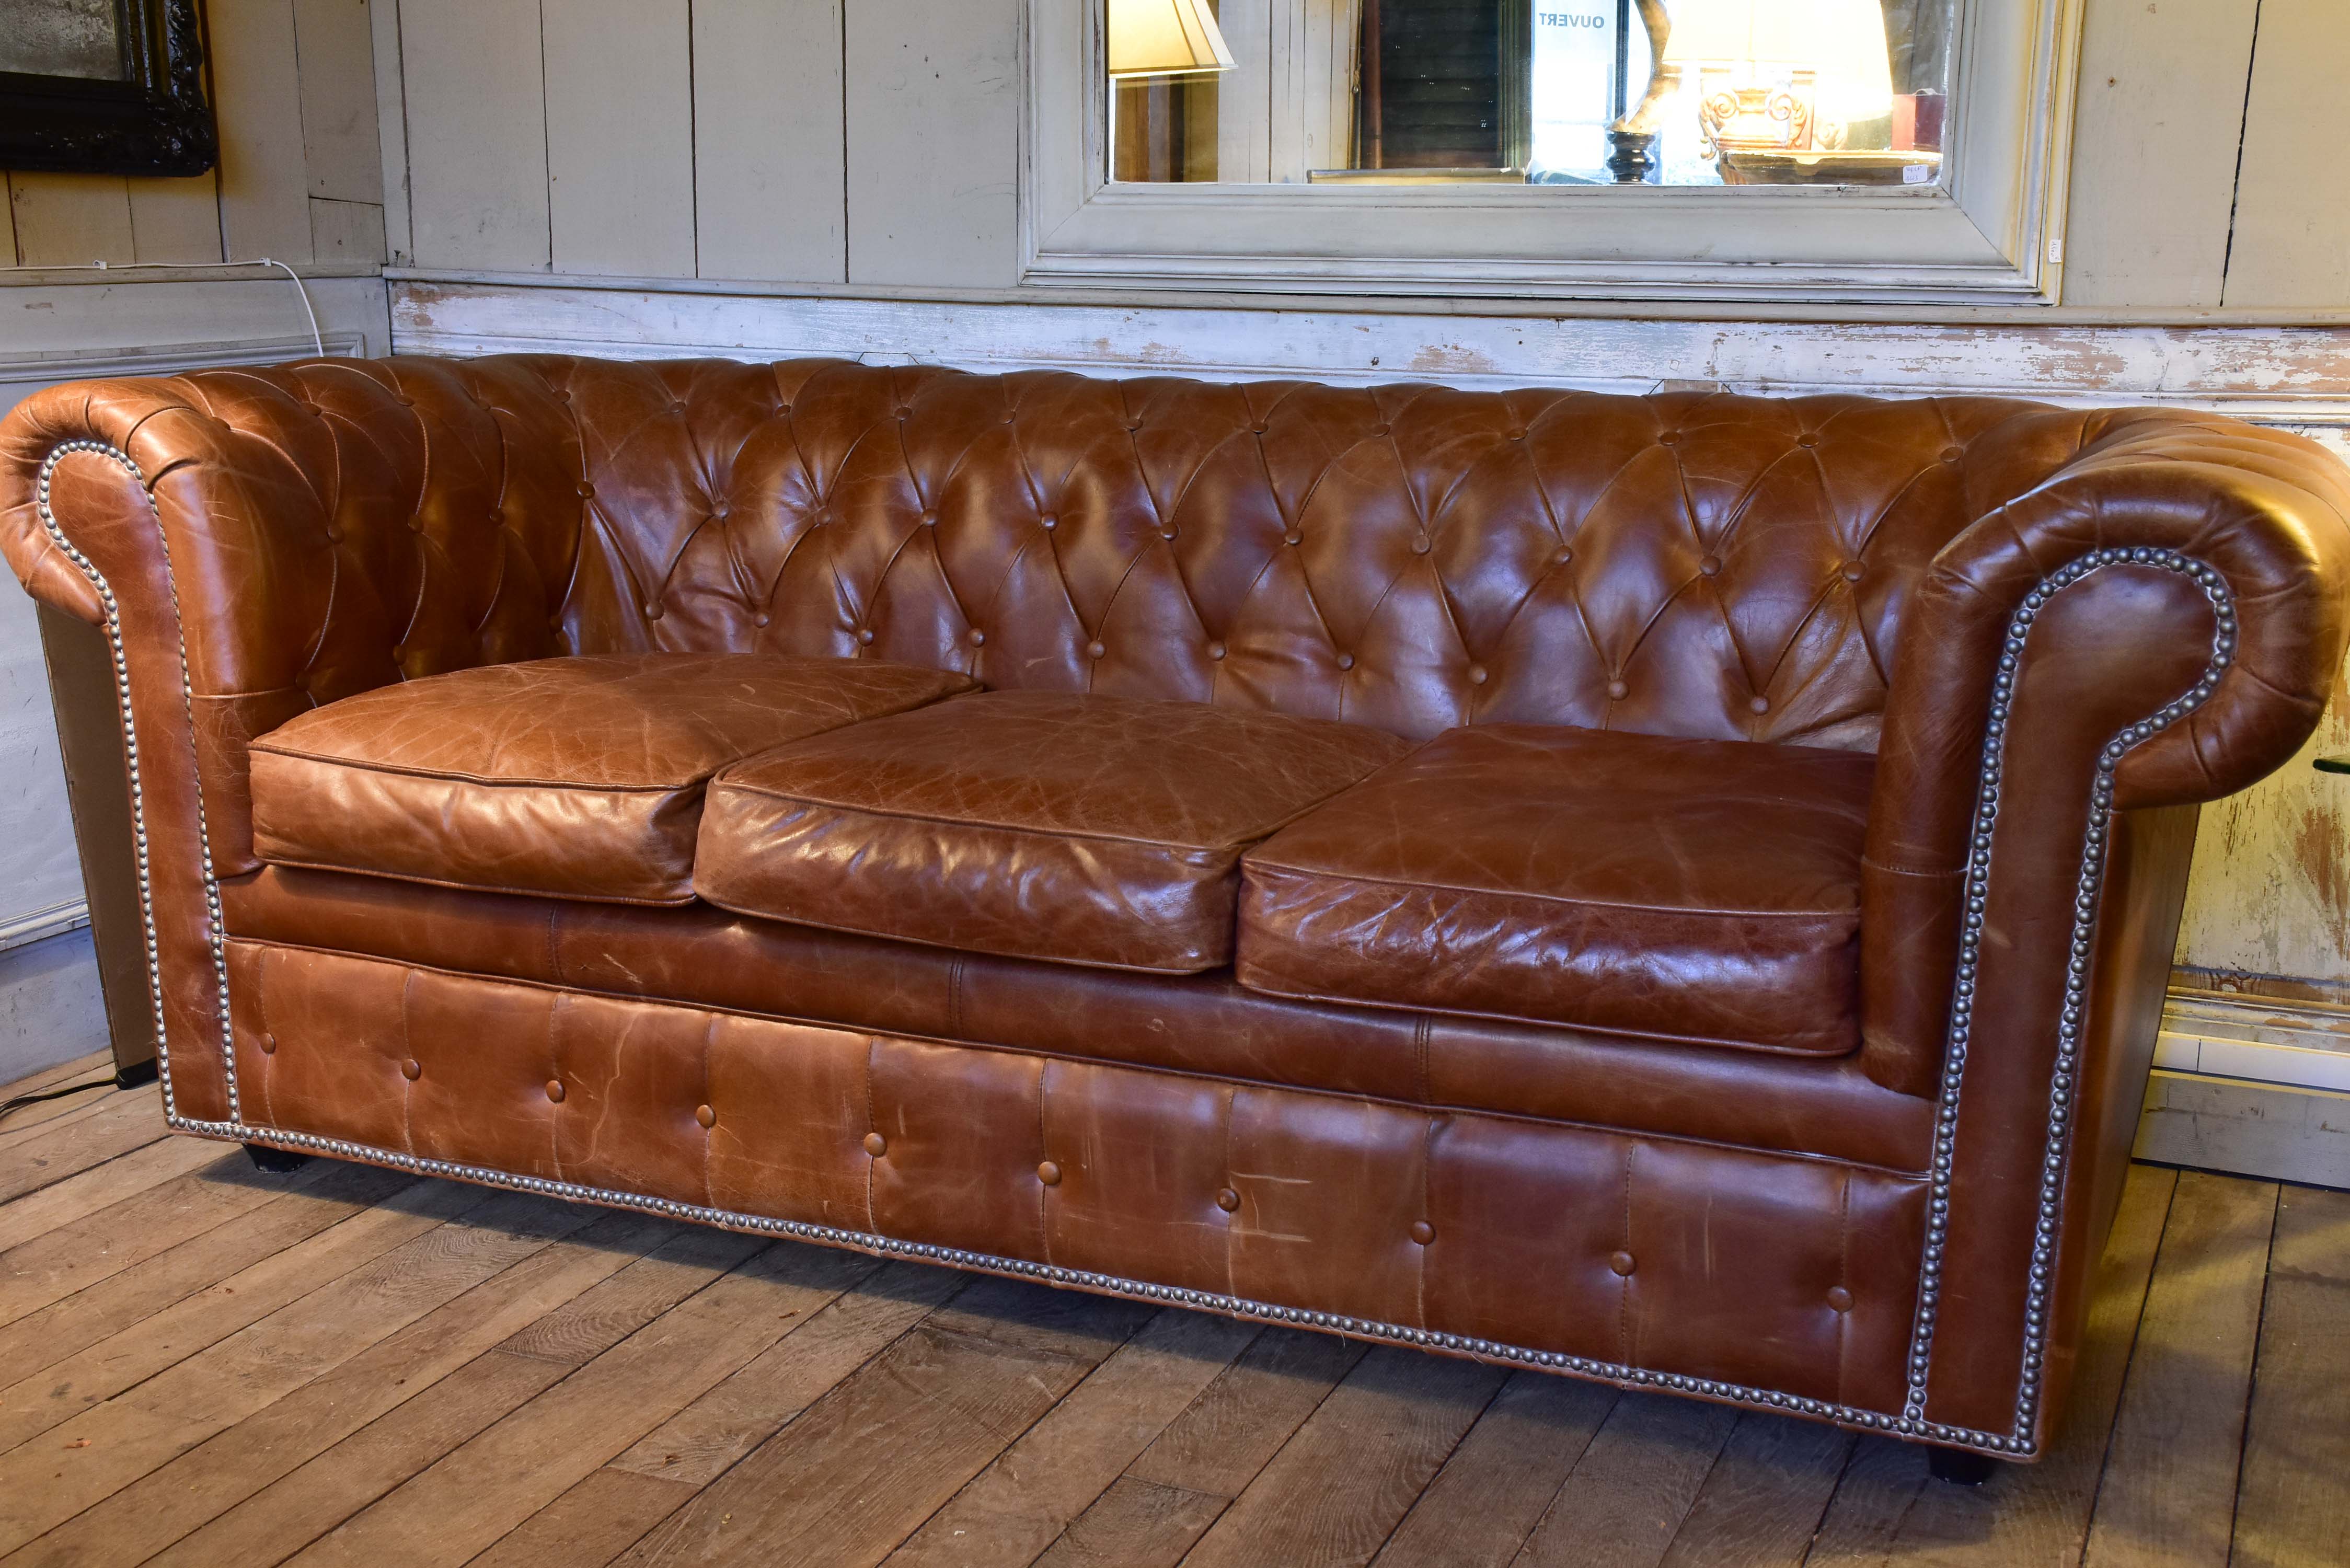 leather chesterfield sofa bed uk